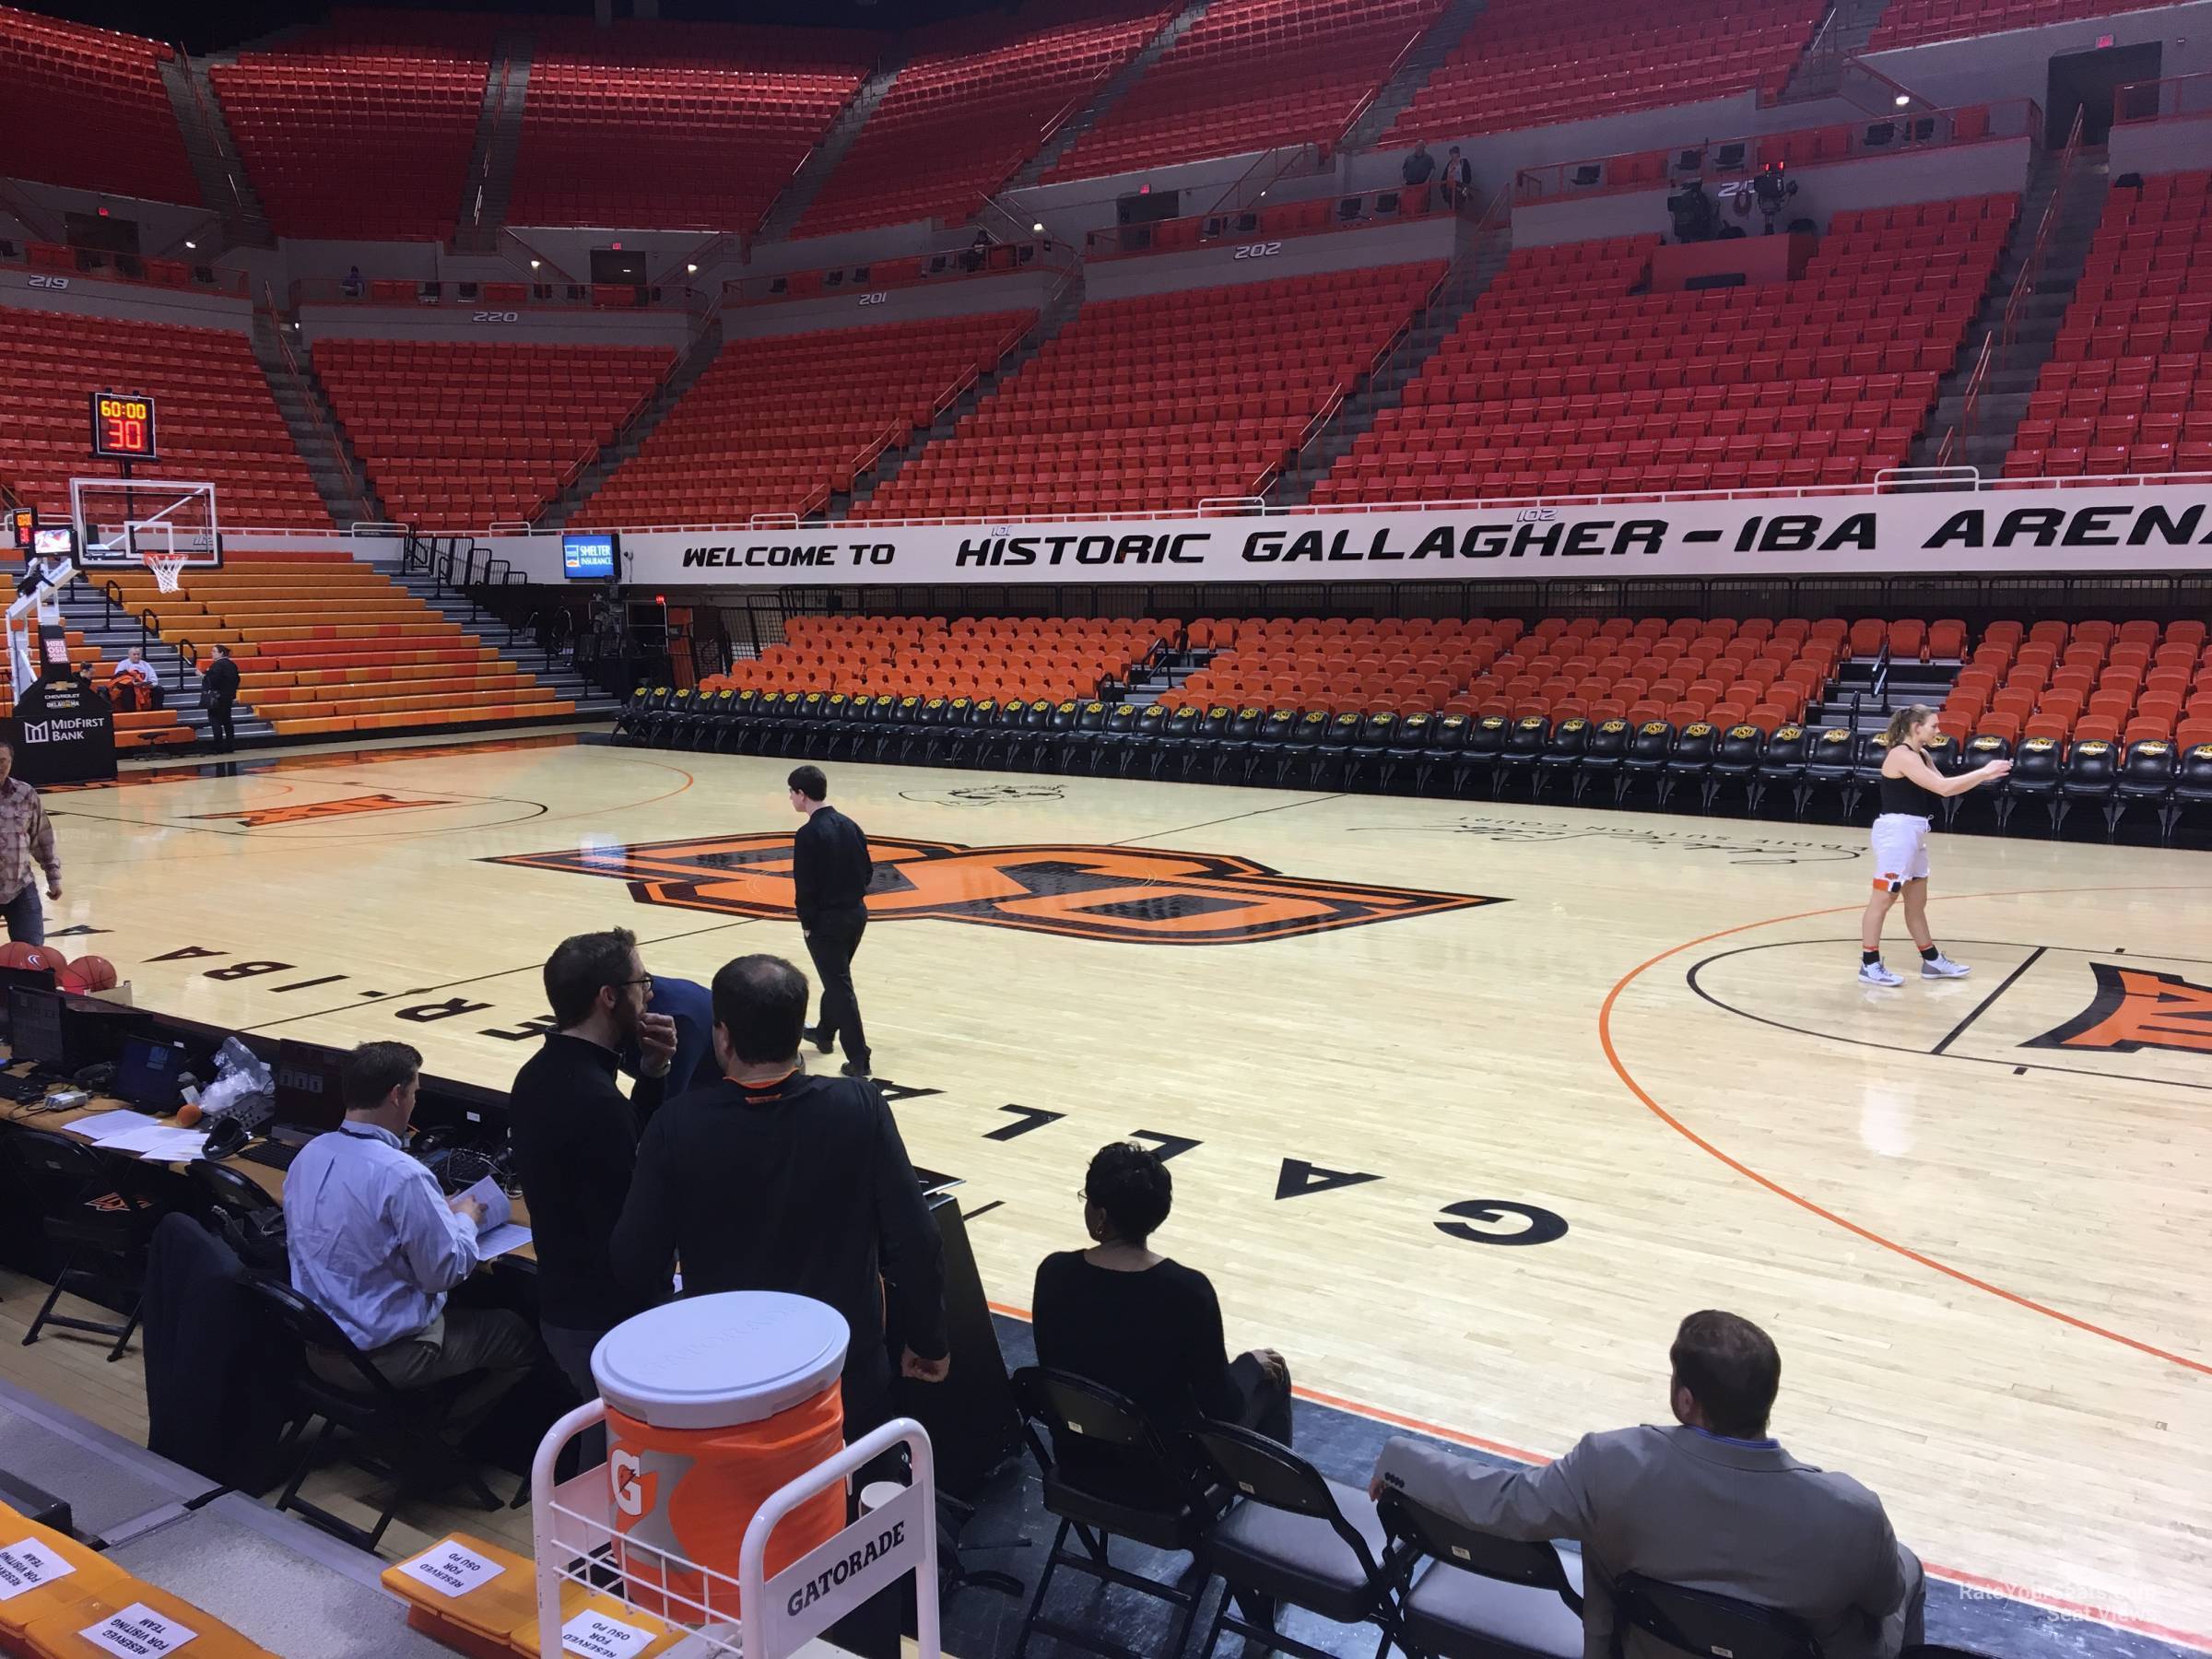 section 107, row 3 seat view  - gallagher-iba arena